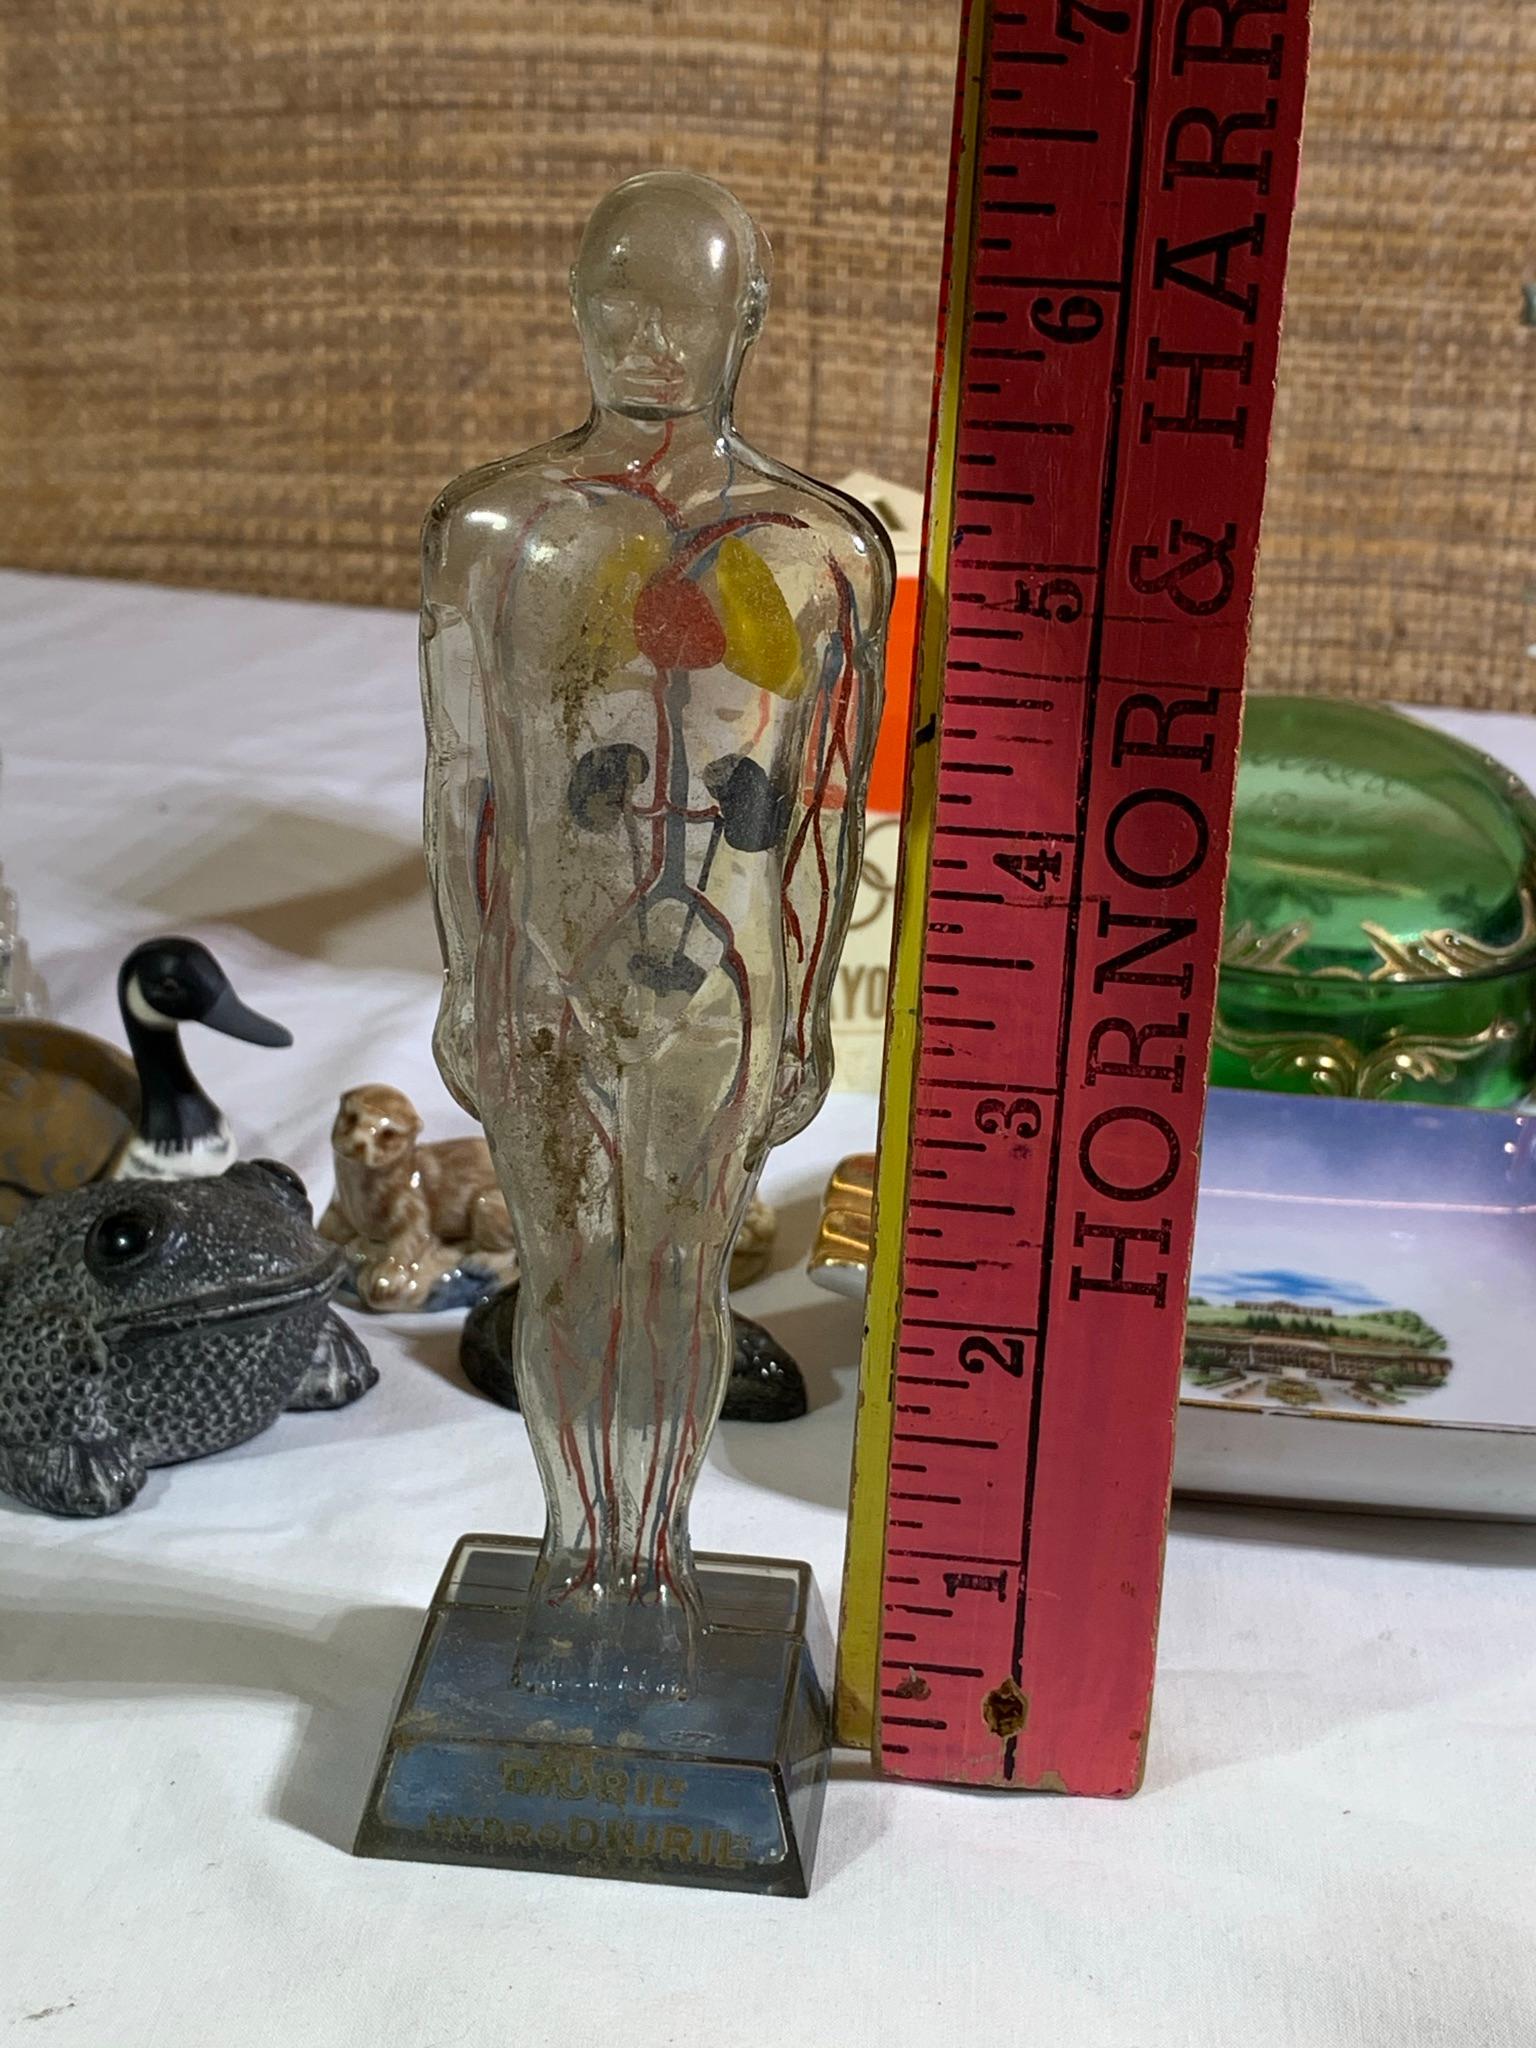 Vintage 1950s Small Clear Anatomical Model of Human Body, Eigl Ashtray,  Bank & More.